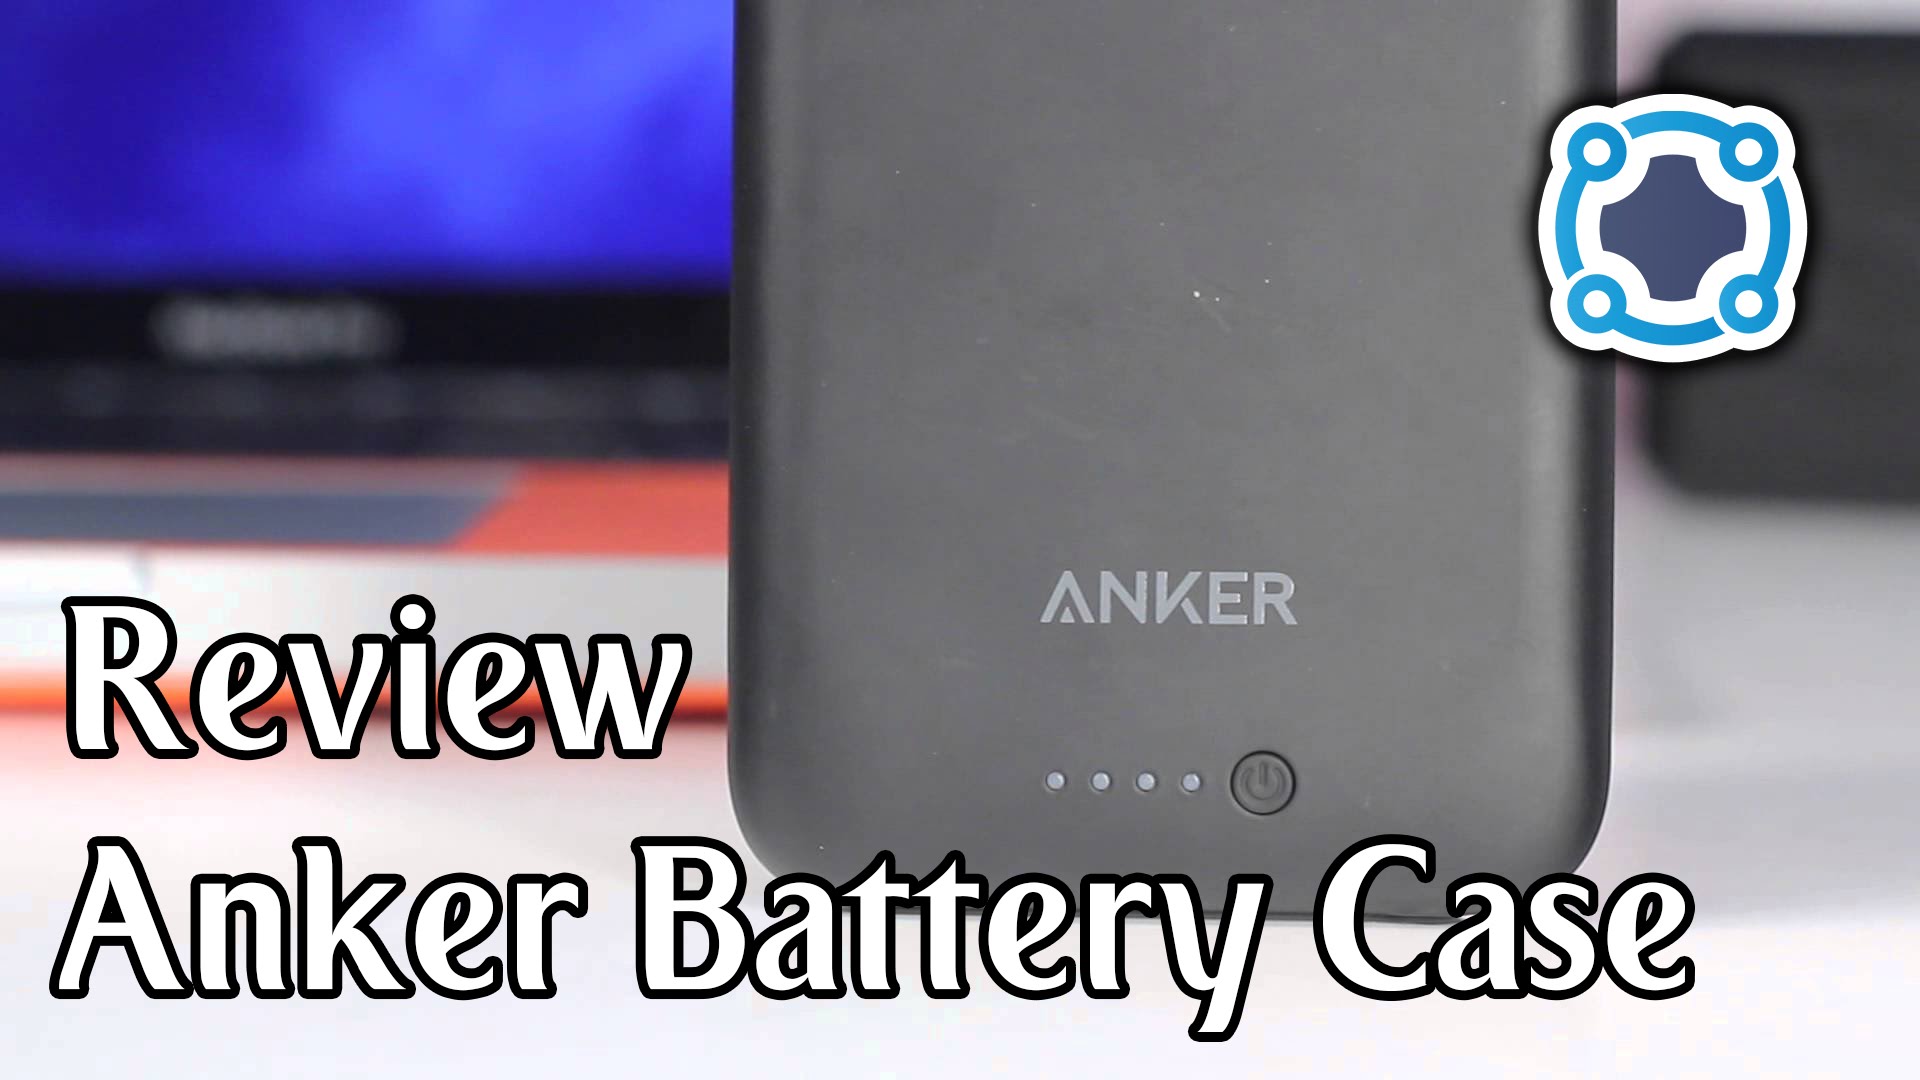 Review - Anker Ultra Slim iPhone 6 Battery Case